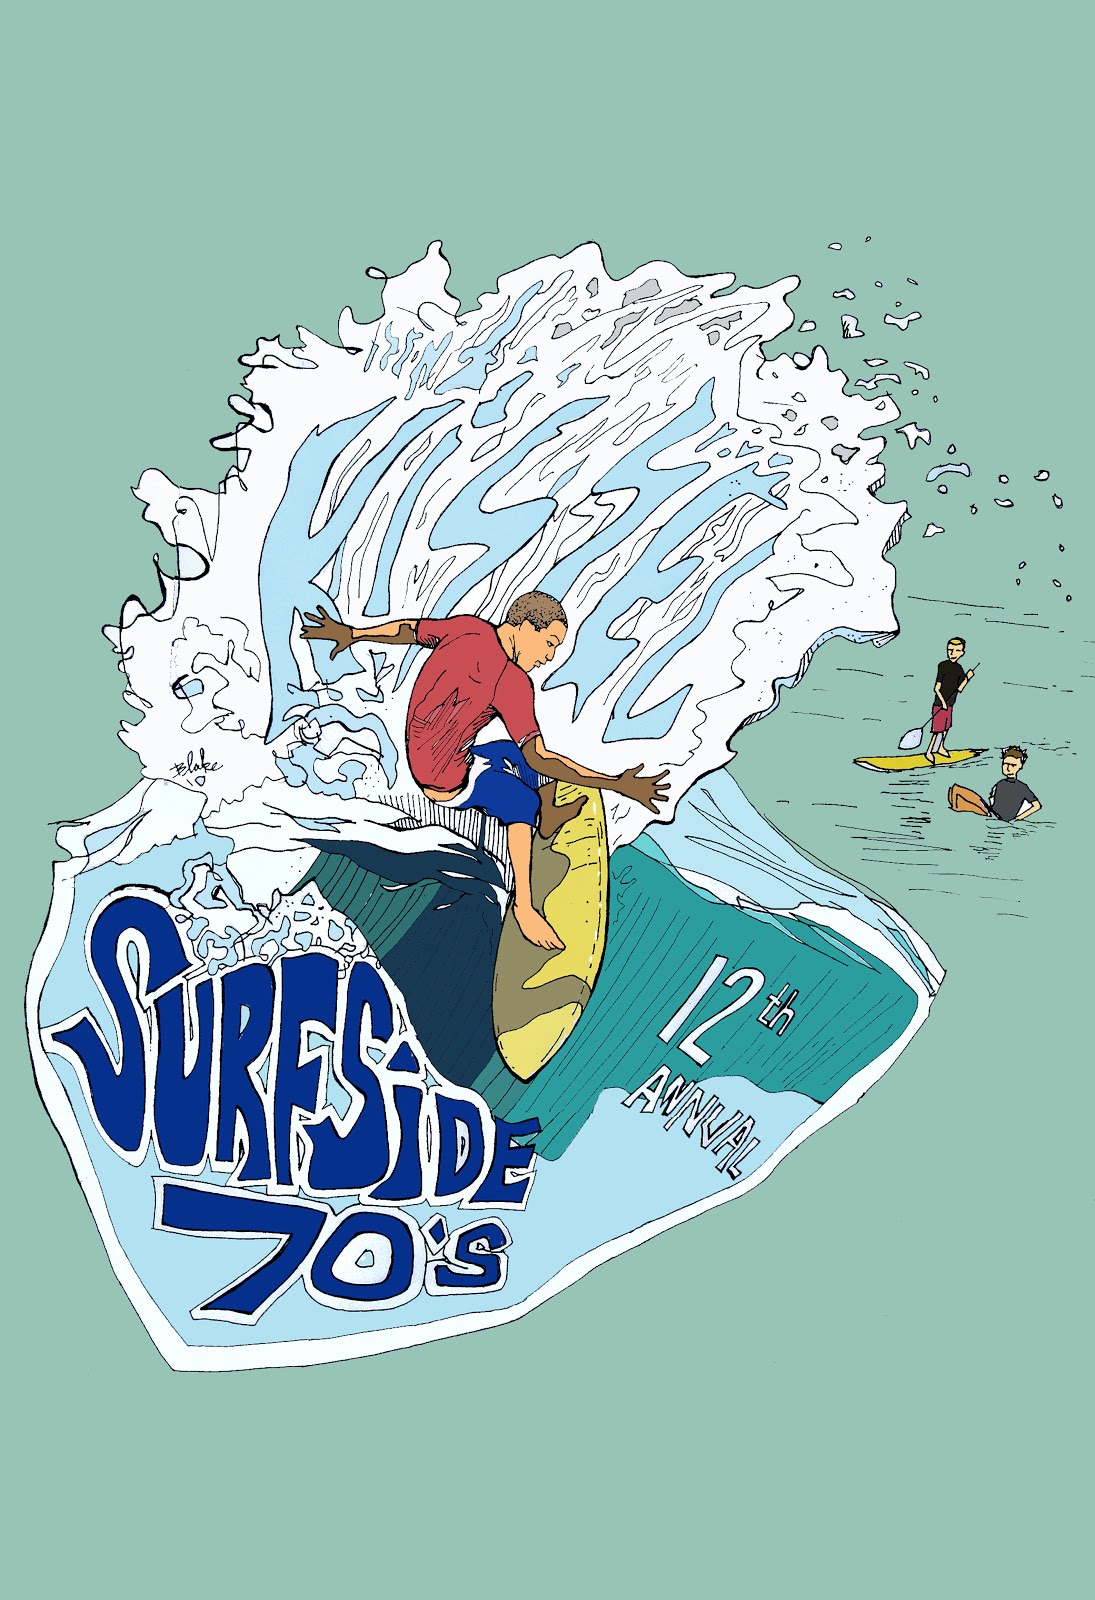 2010 12th annual Surfside Seventies poster